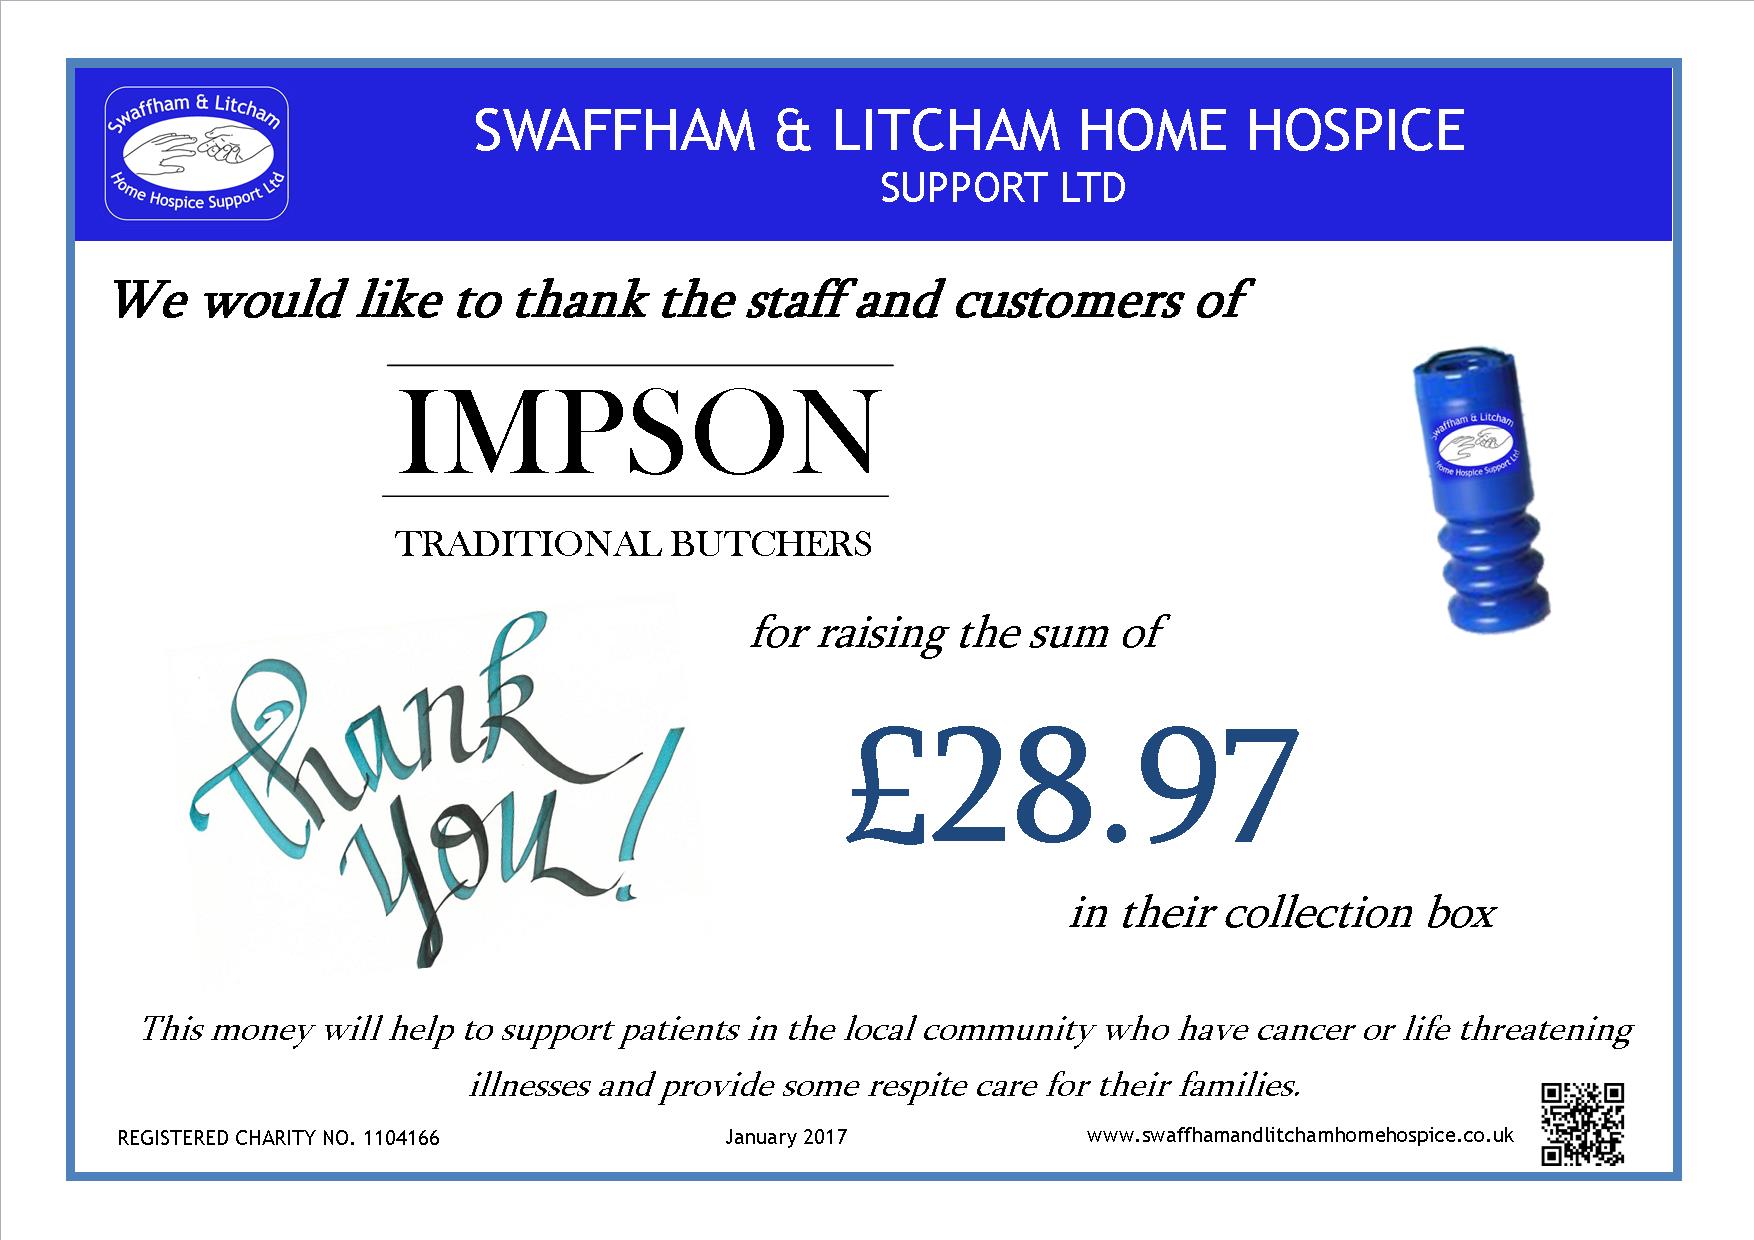 Money raised by Customer and Staff at Impson's January 2017